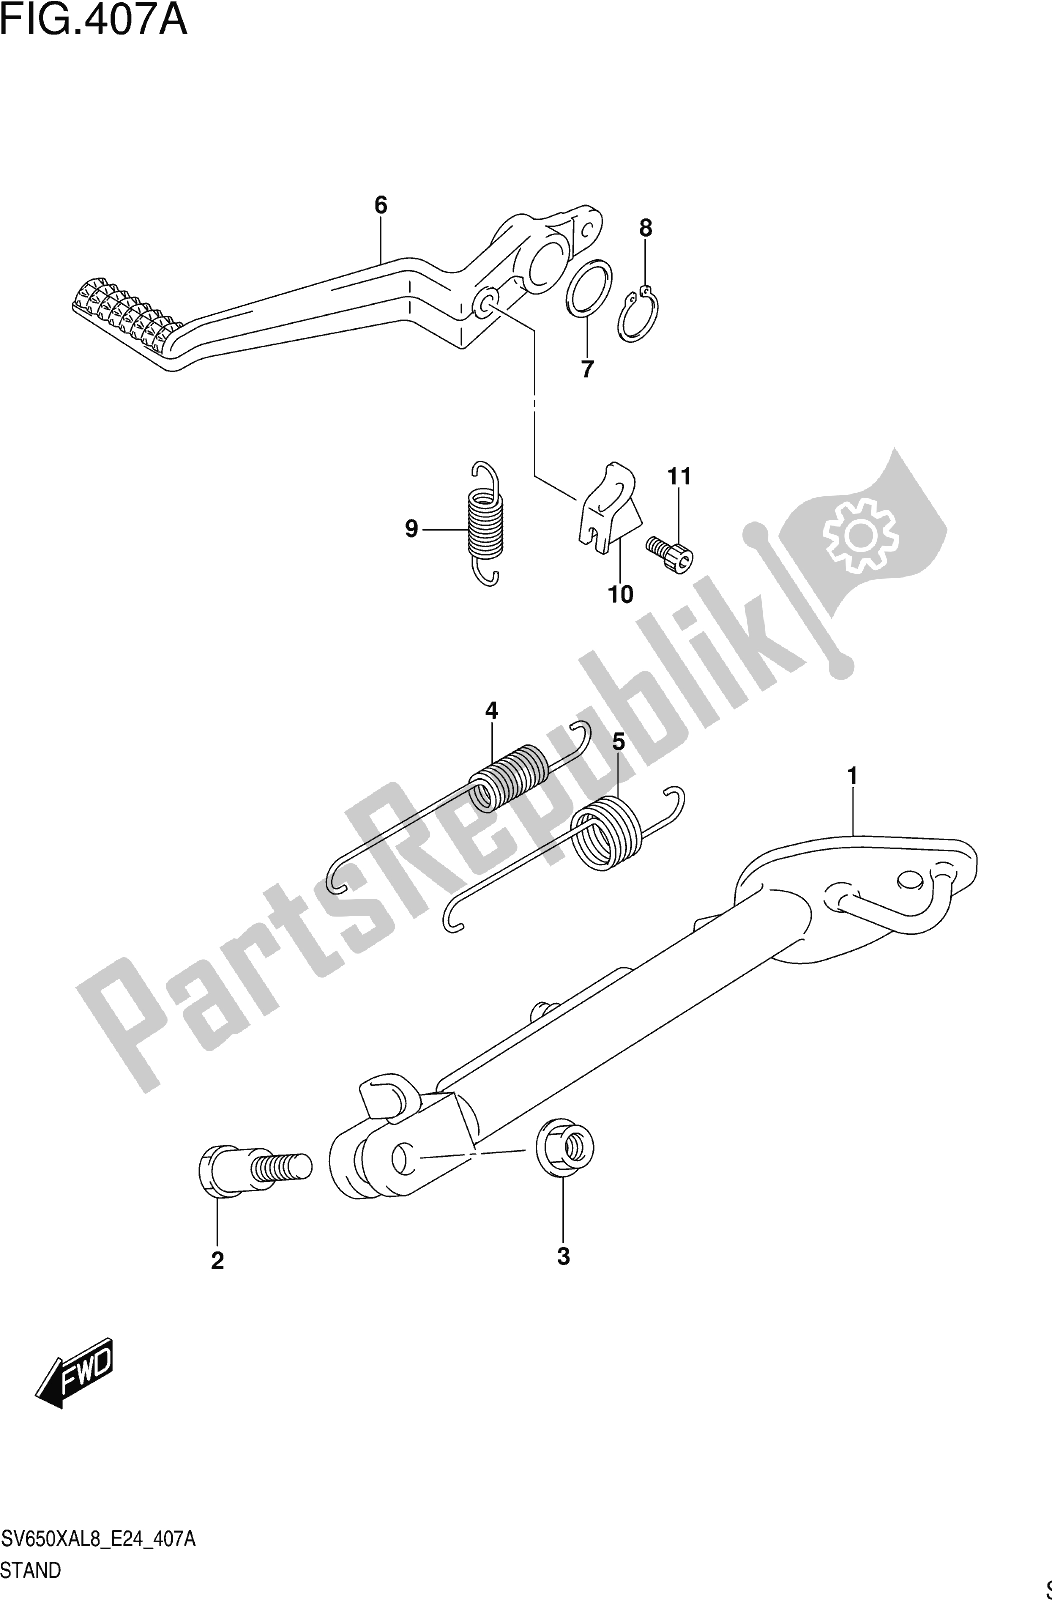 All parts for the Fig. 407a Stand of the Suzuki SV 650 XA 2018